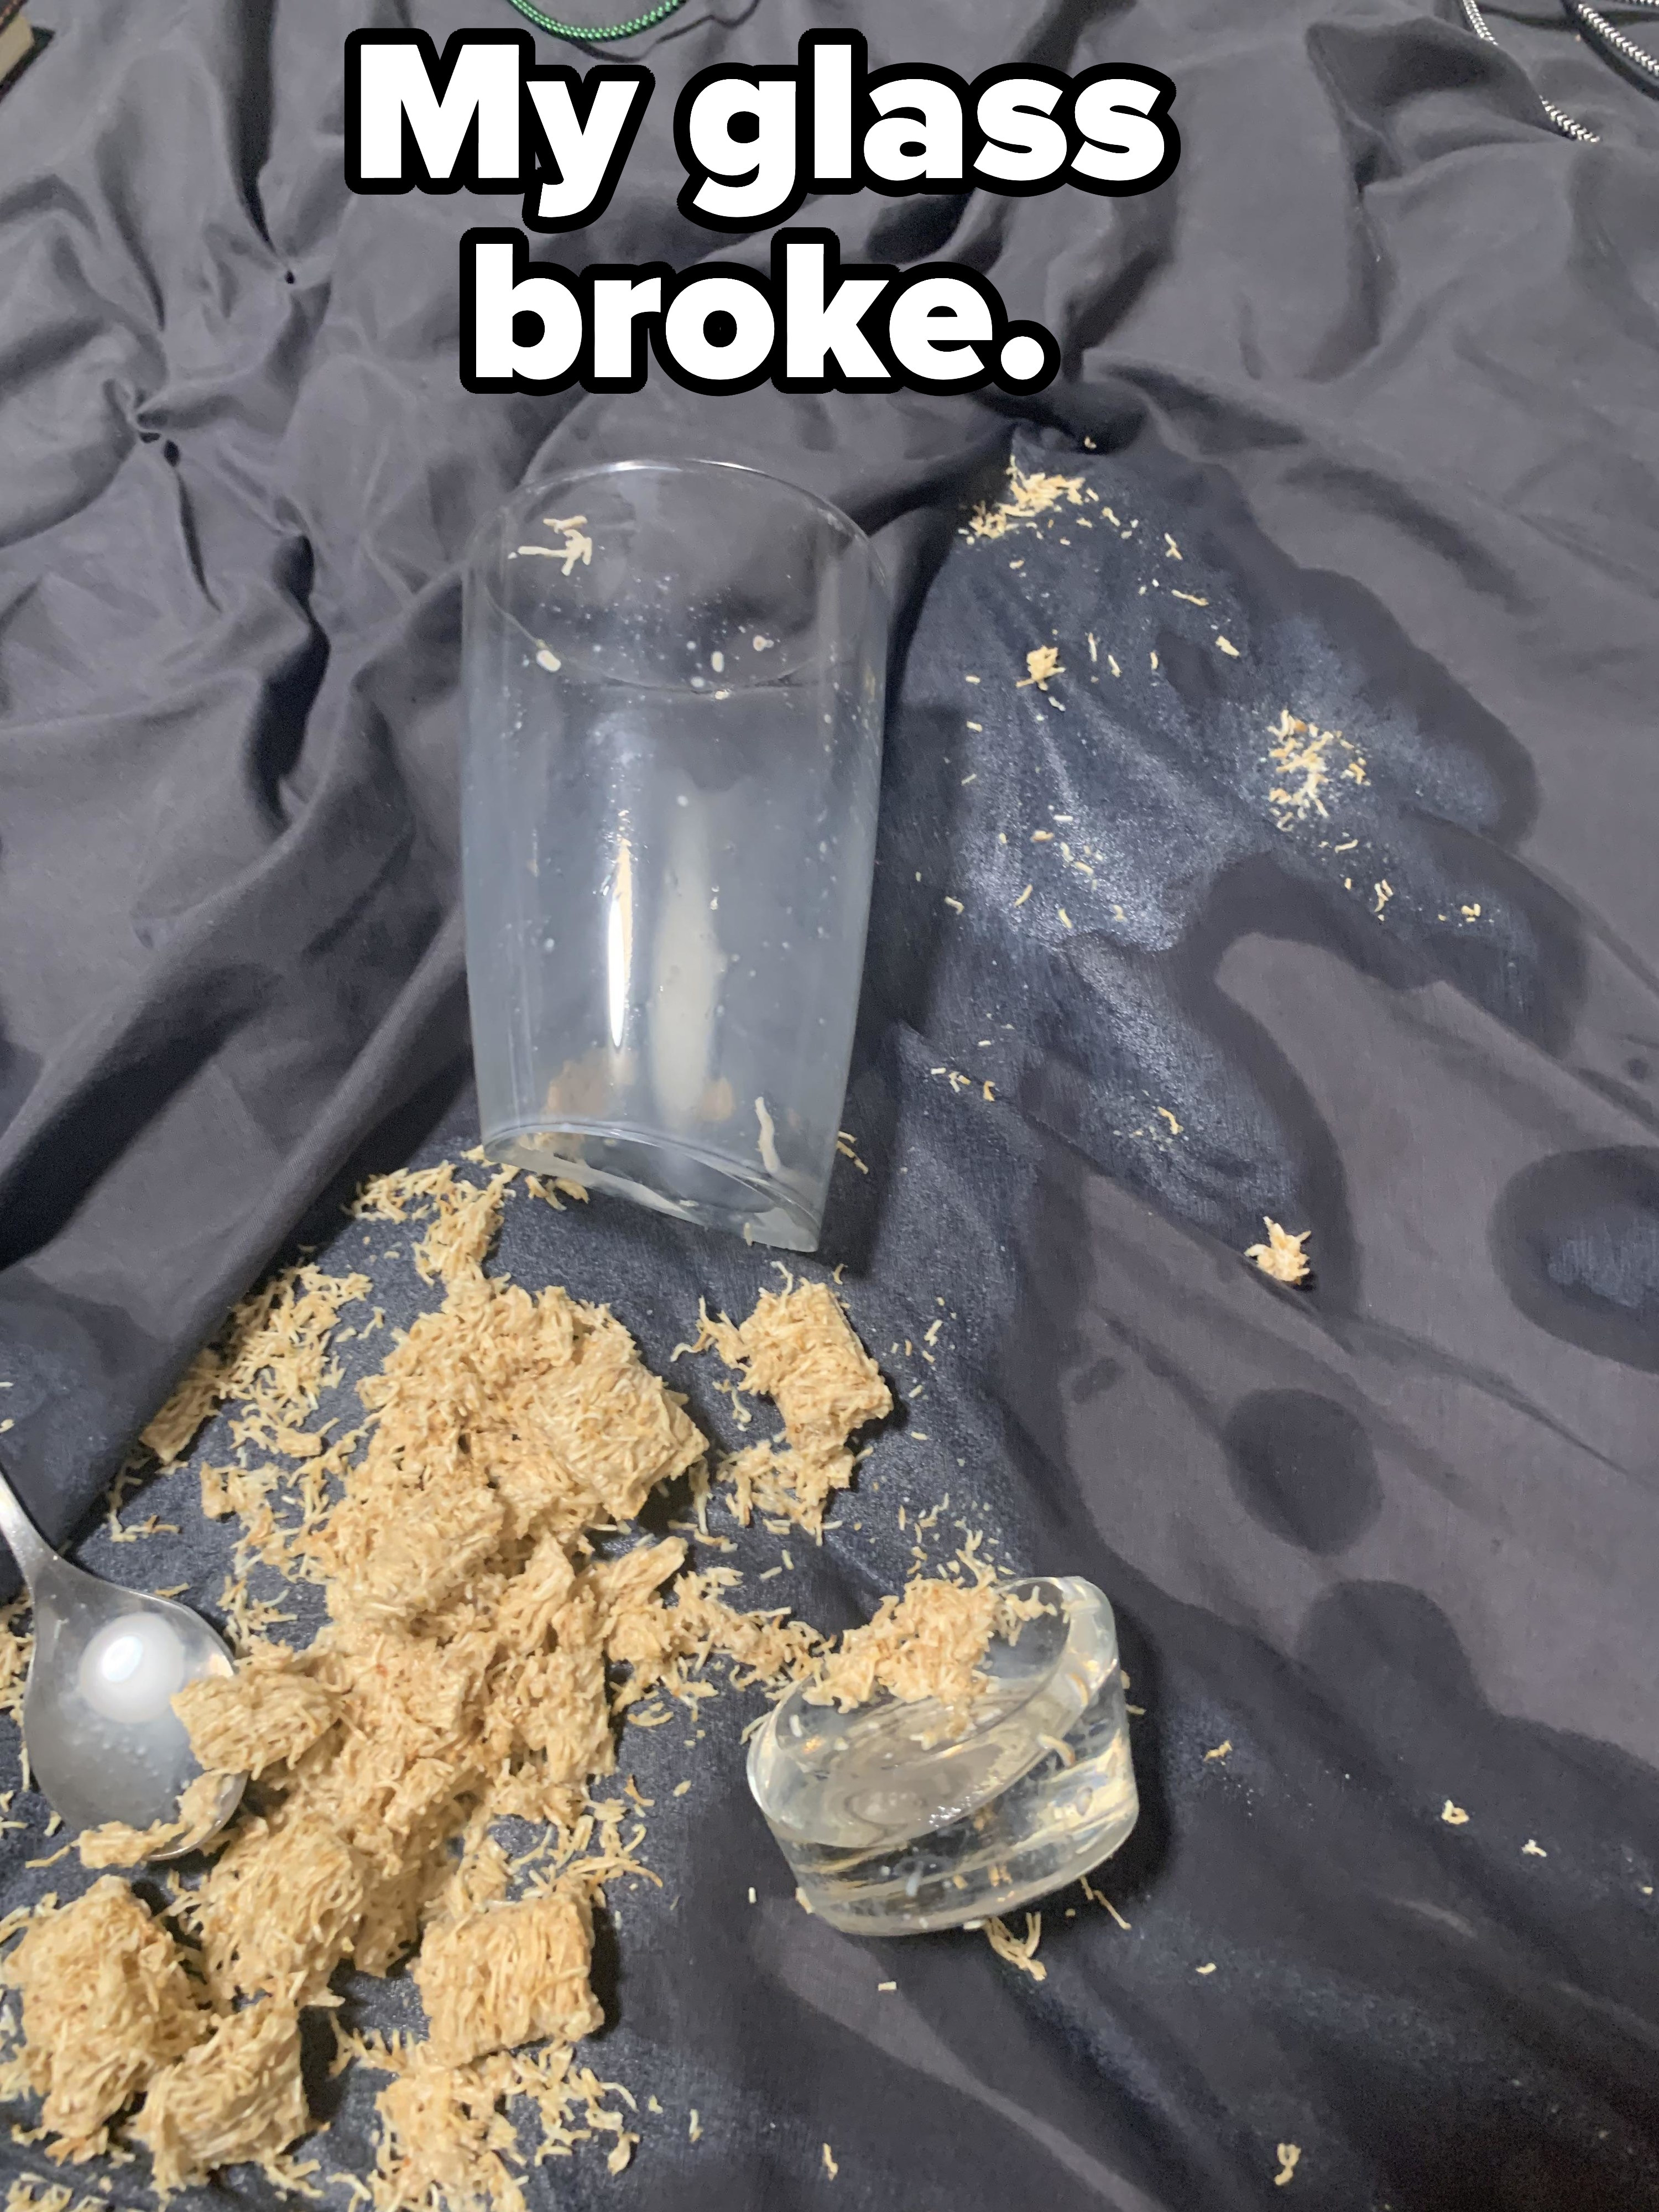 Glass that broke and spilled what looks like shredded wheat in bed